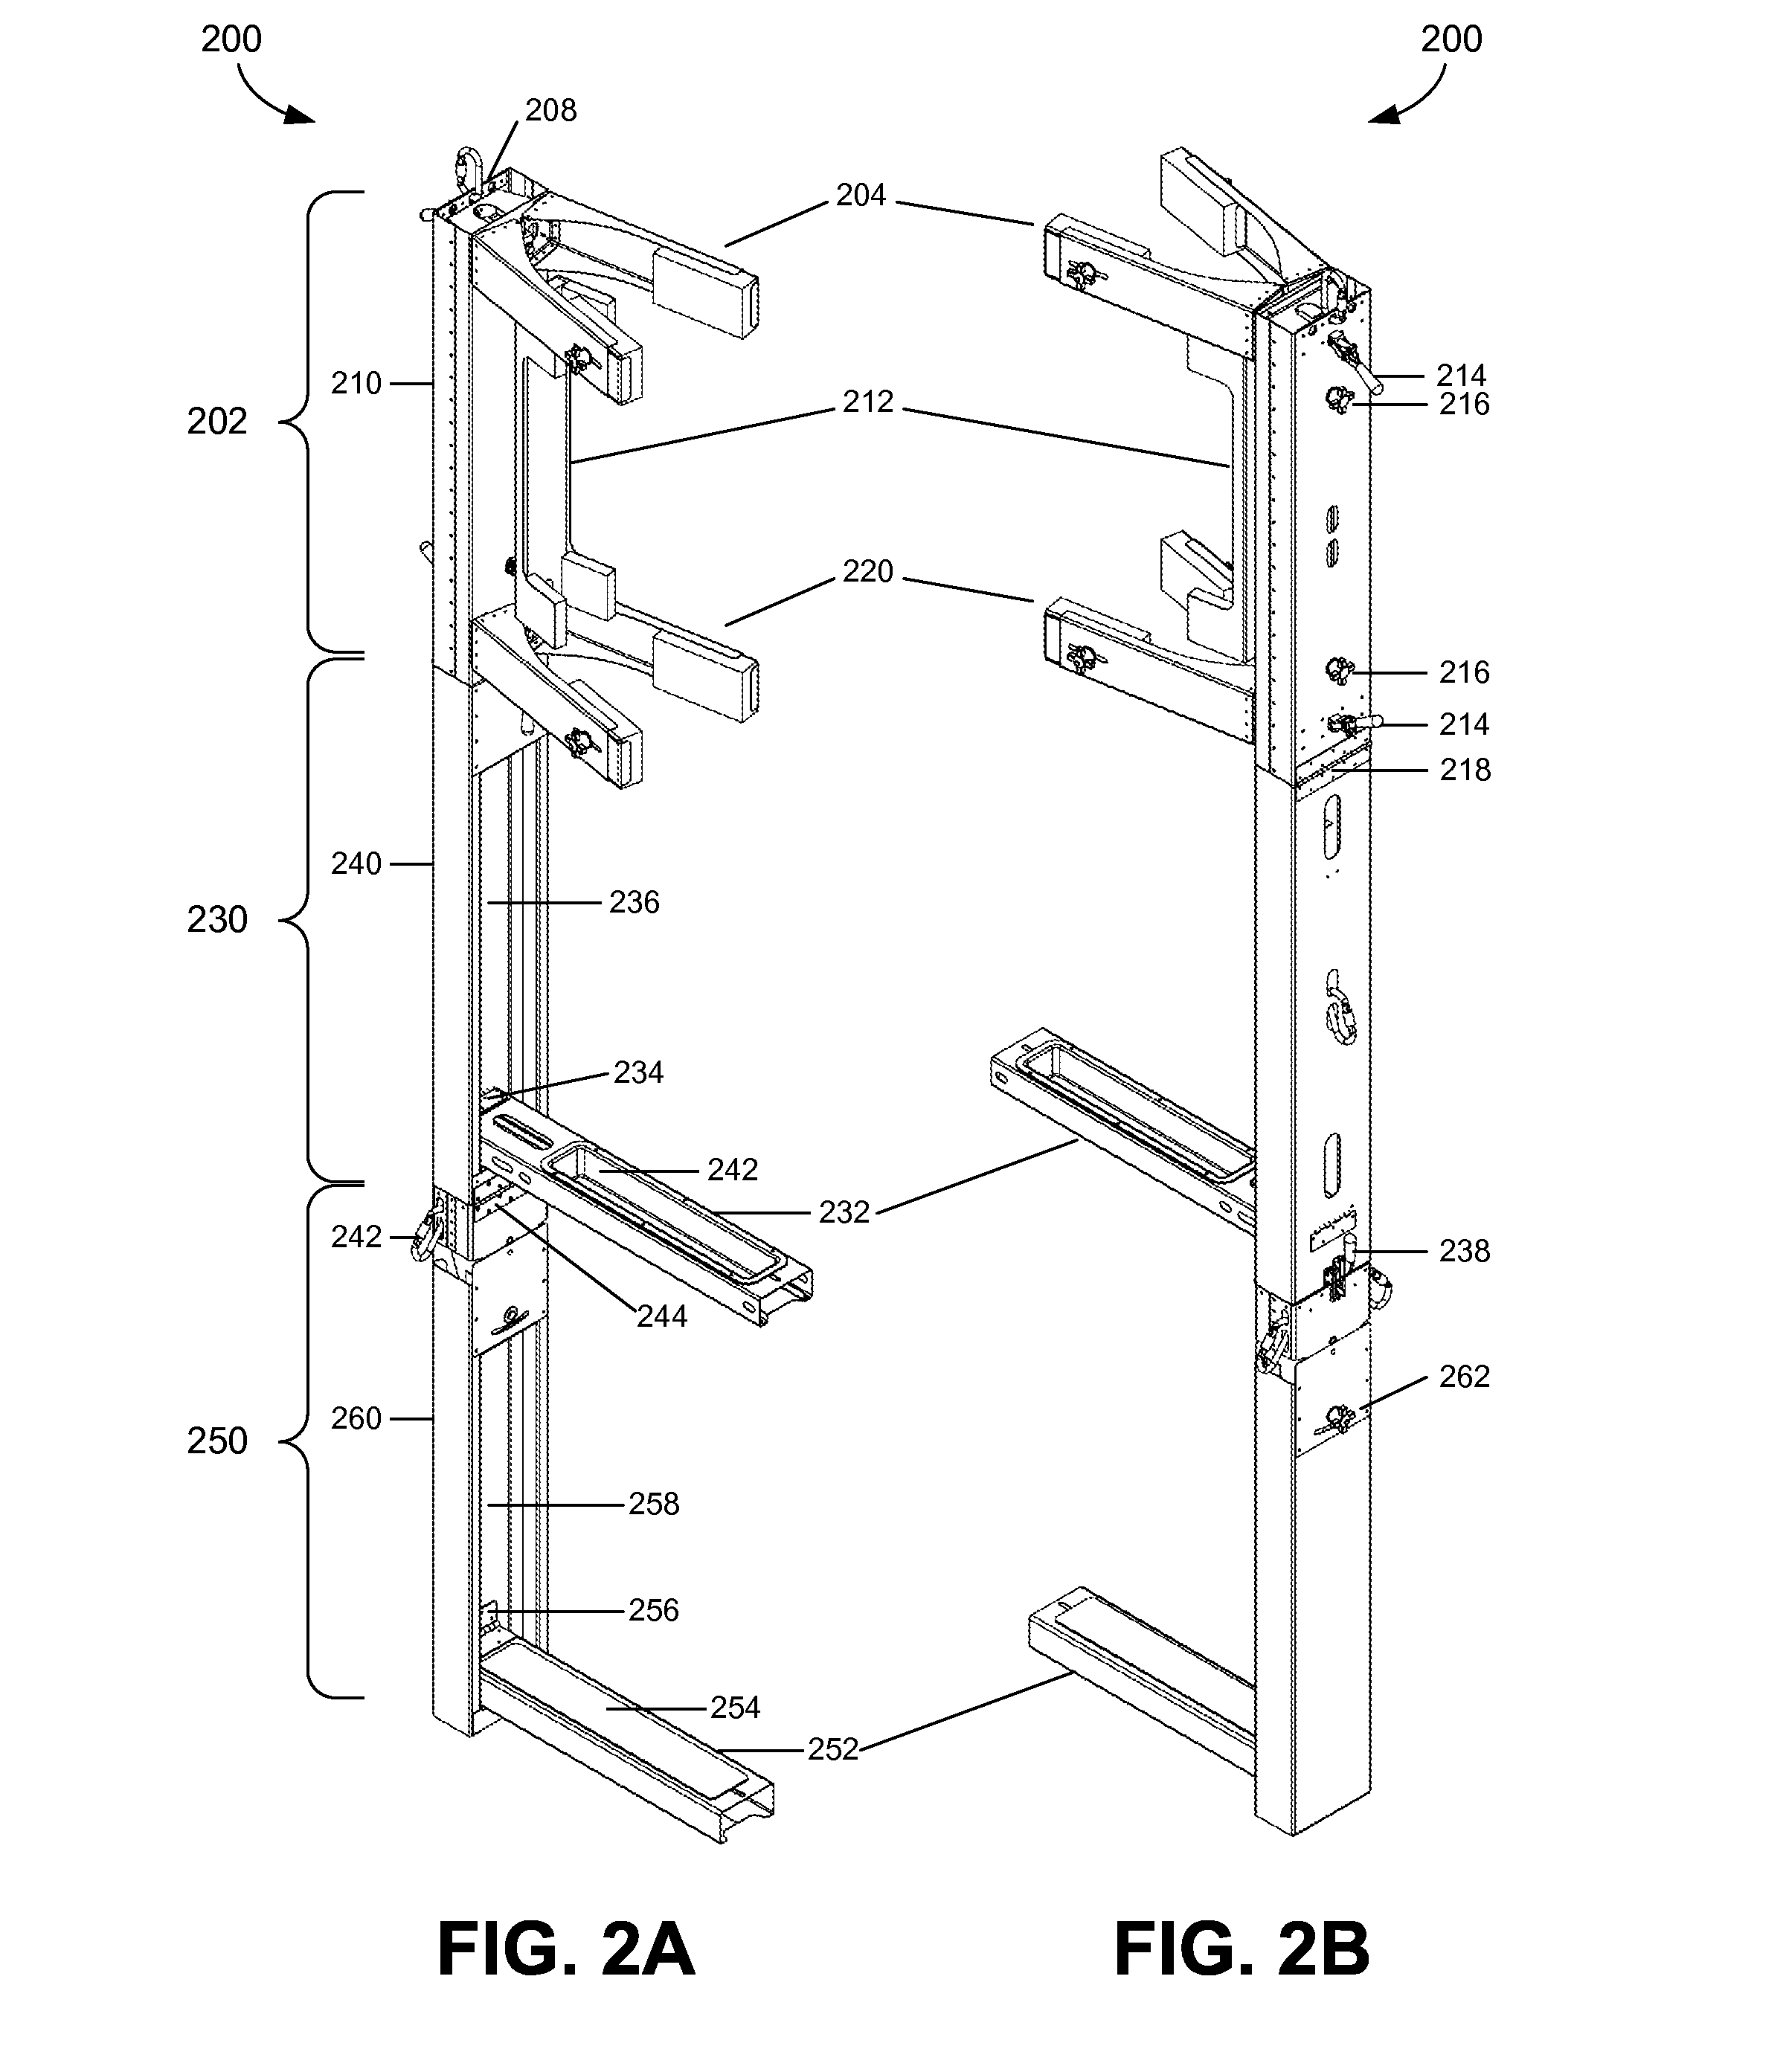 Device for positioning a rope access technician in relation to a blade of a wind turbine